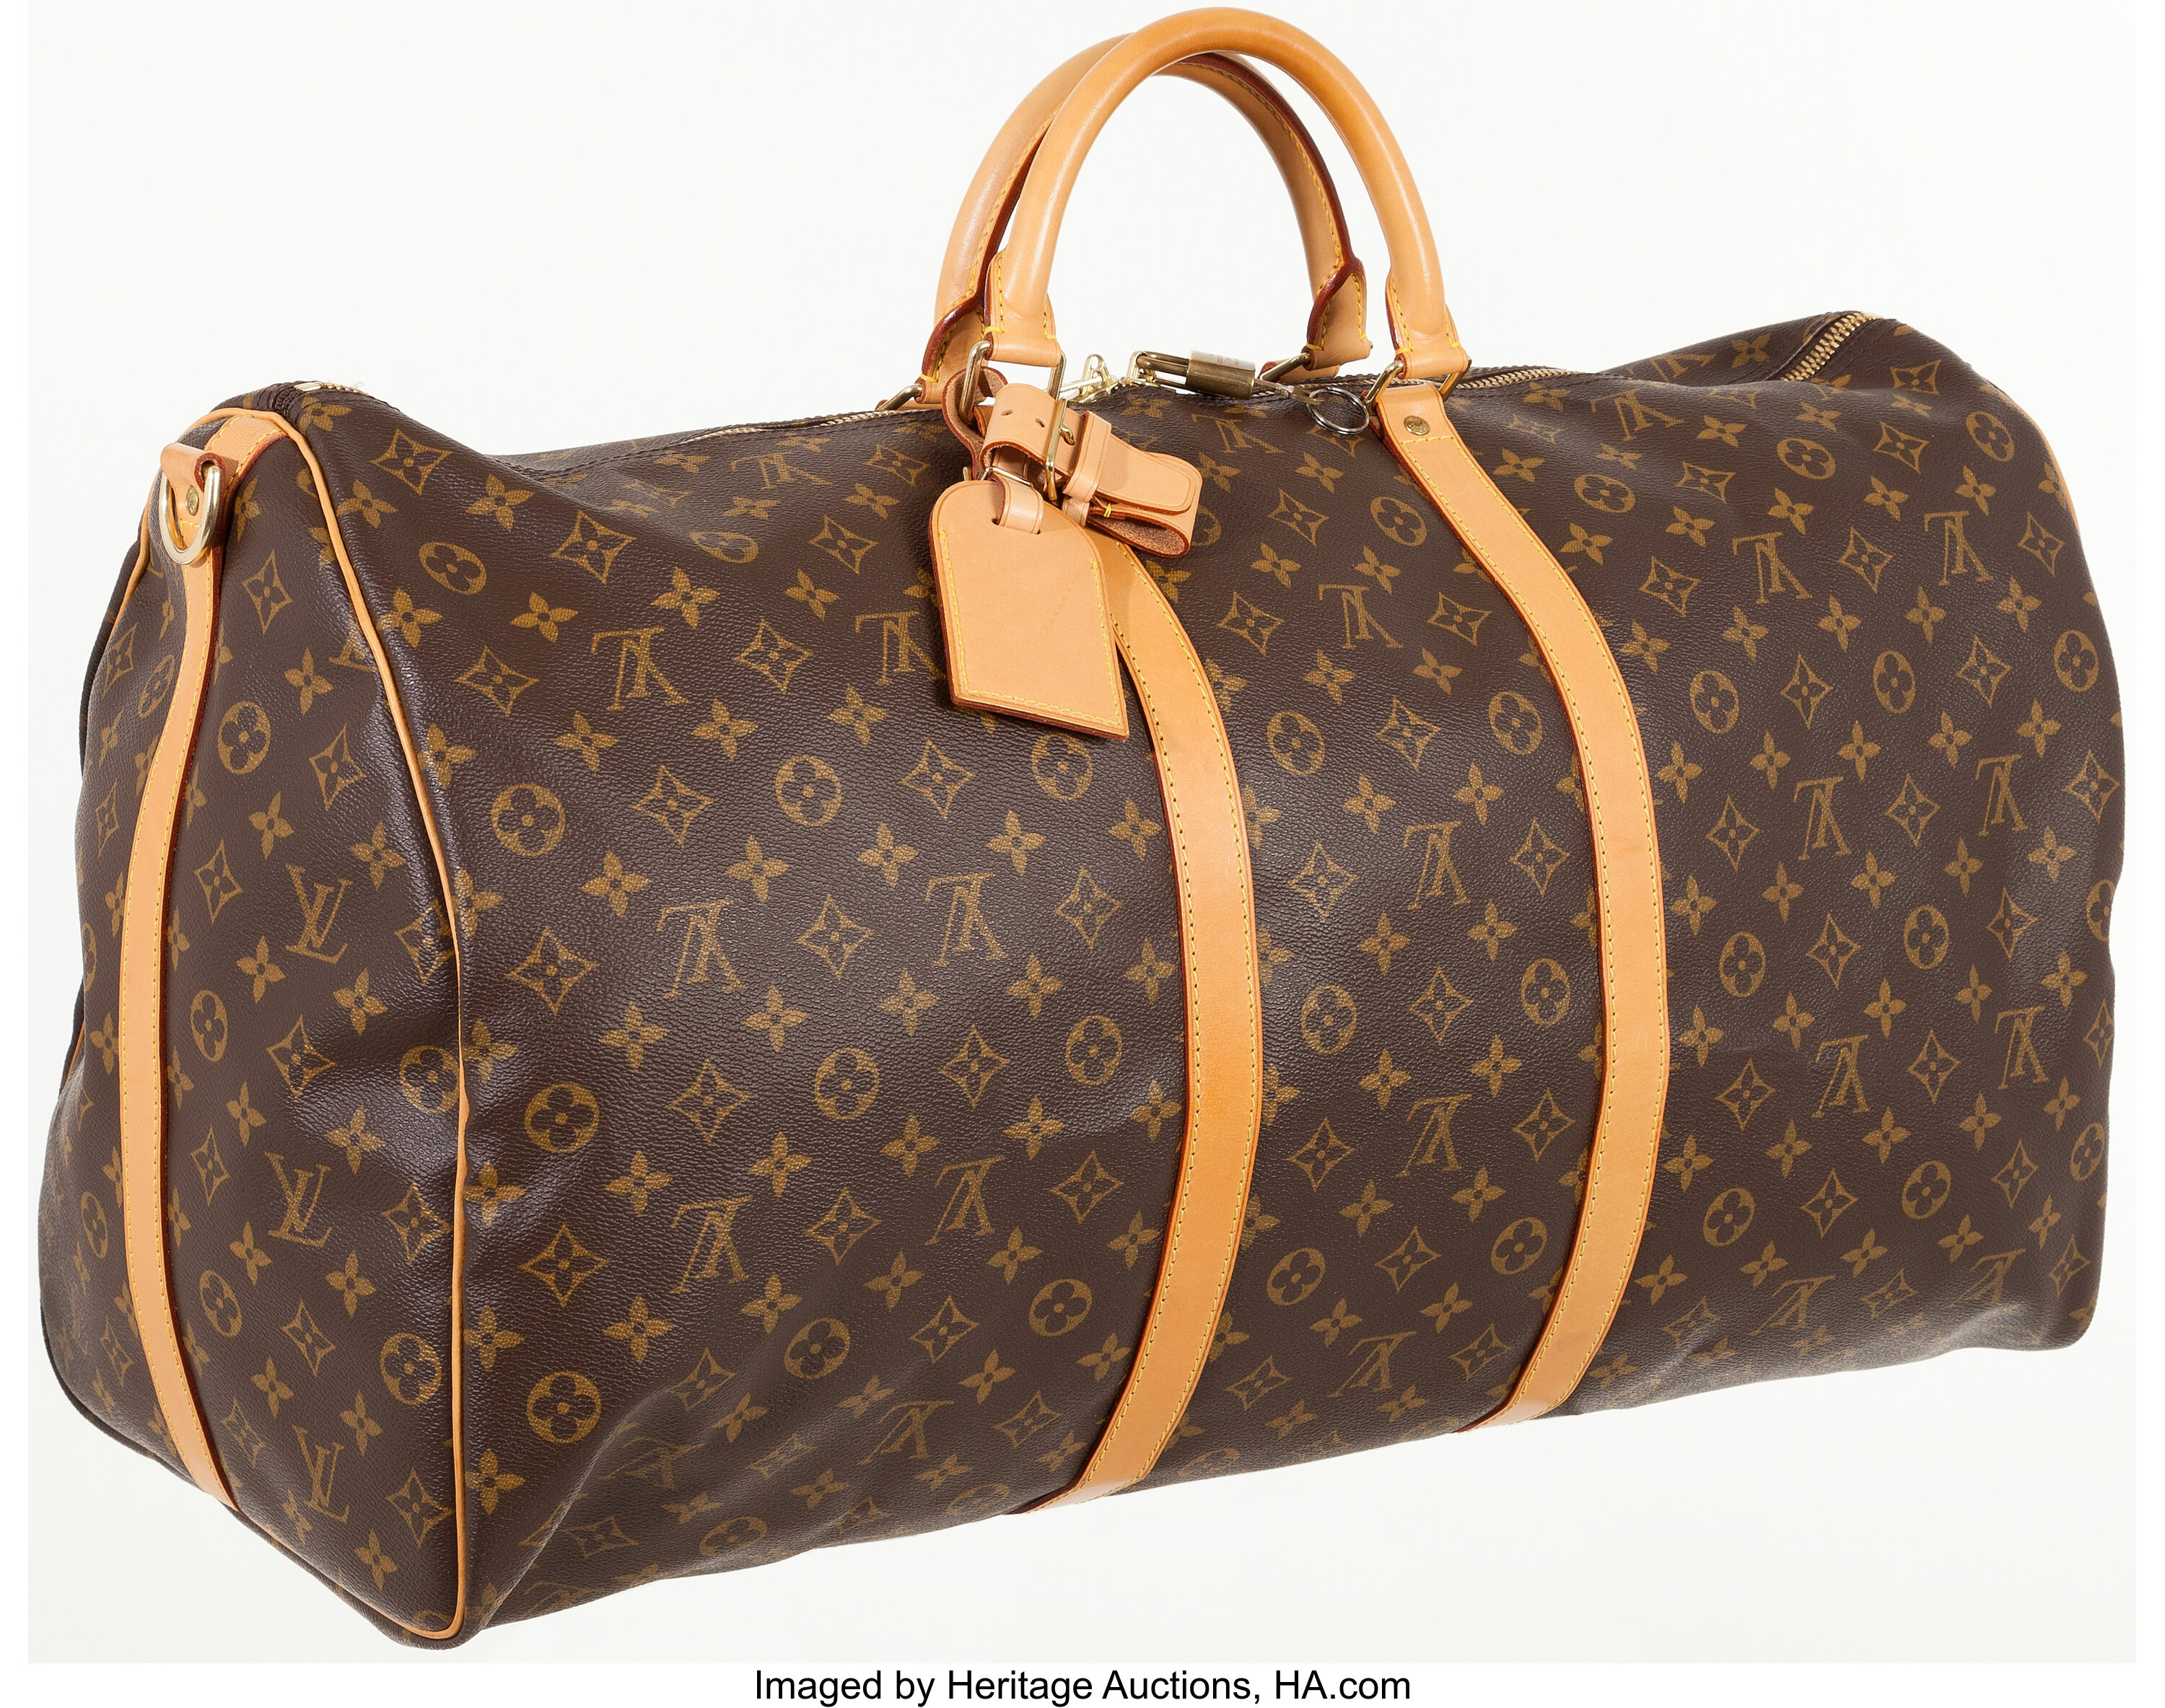 Sold at Auction: Louis Vuitton Black Epi Leather Keepall 60 Duffel